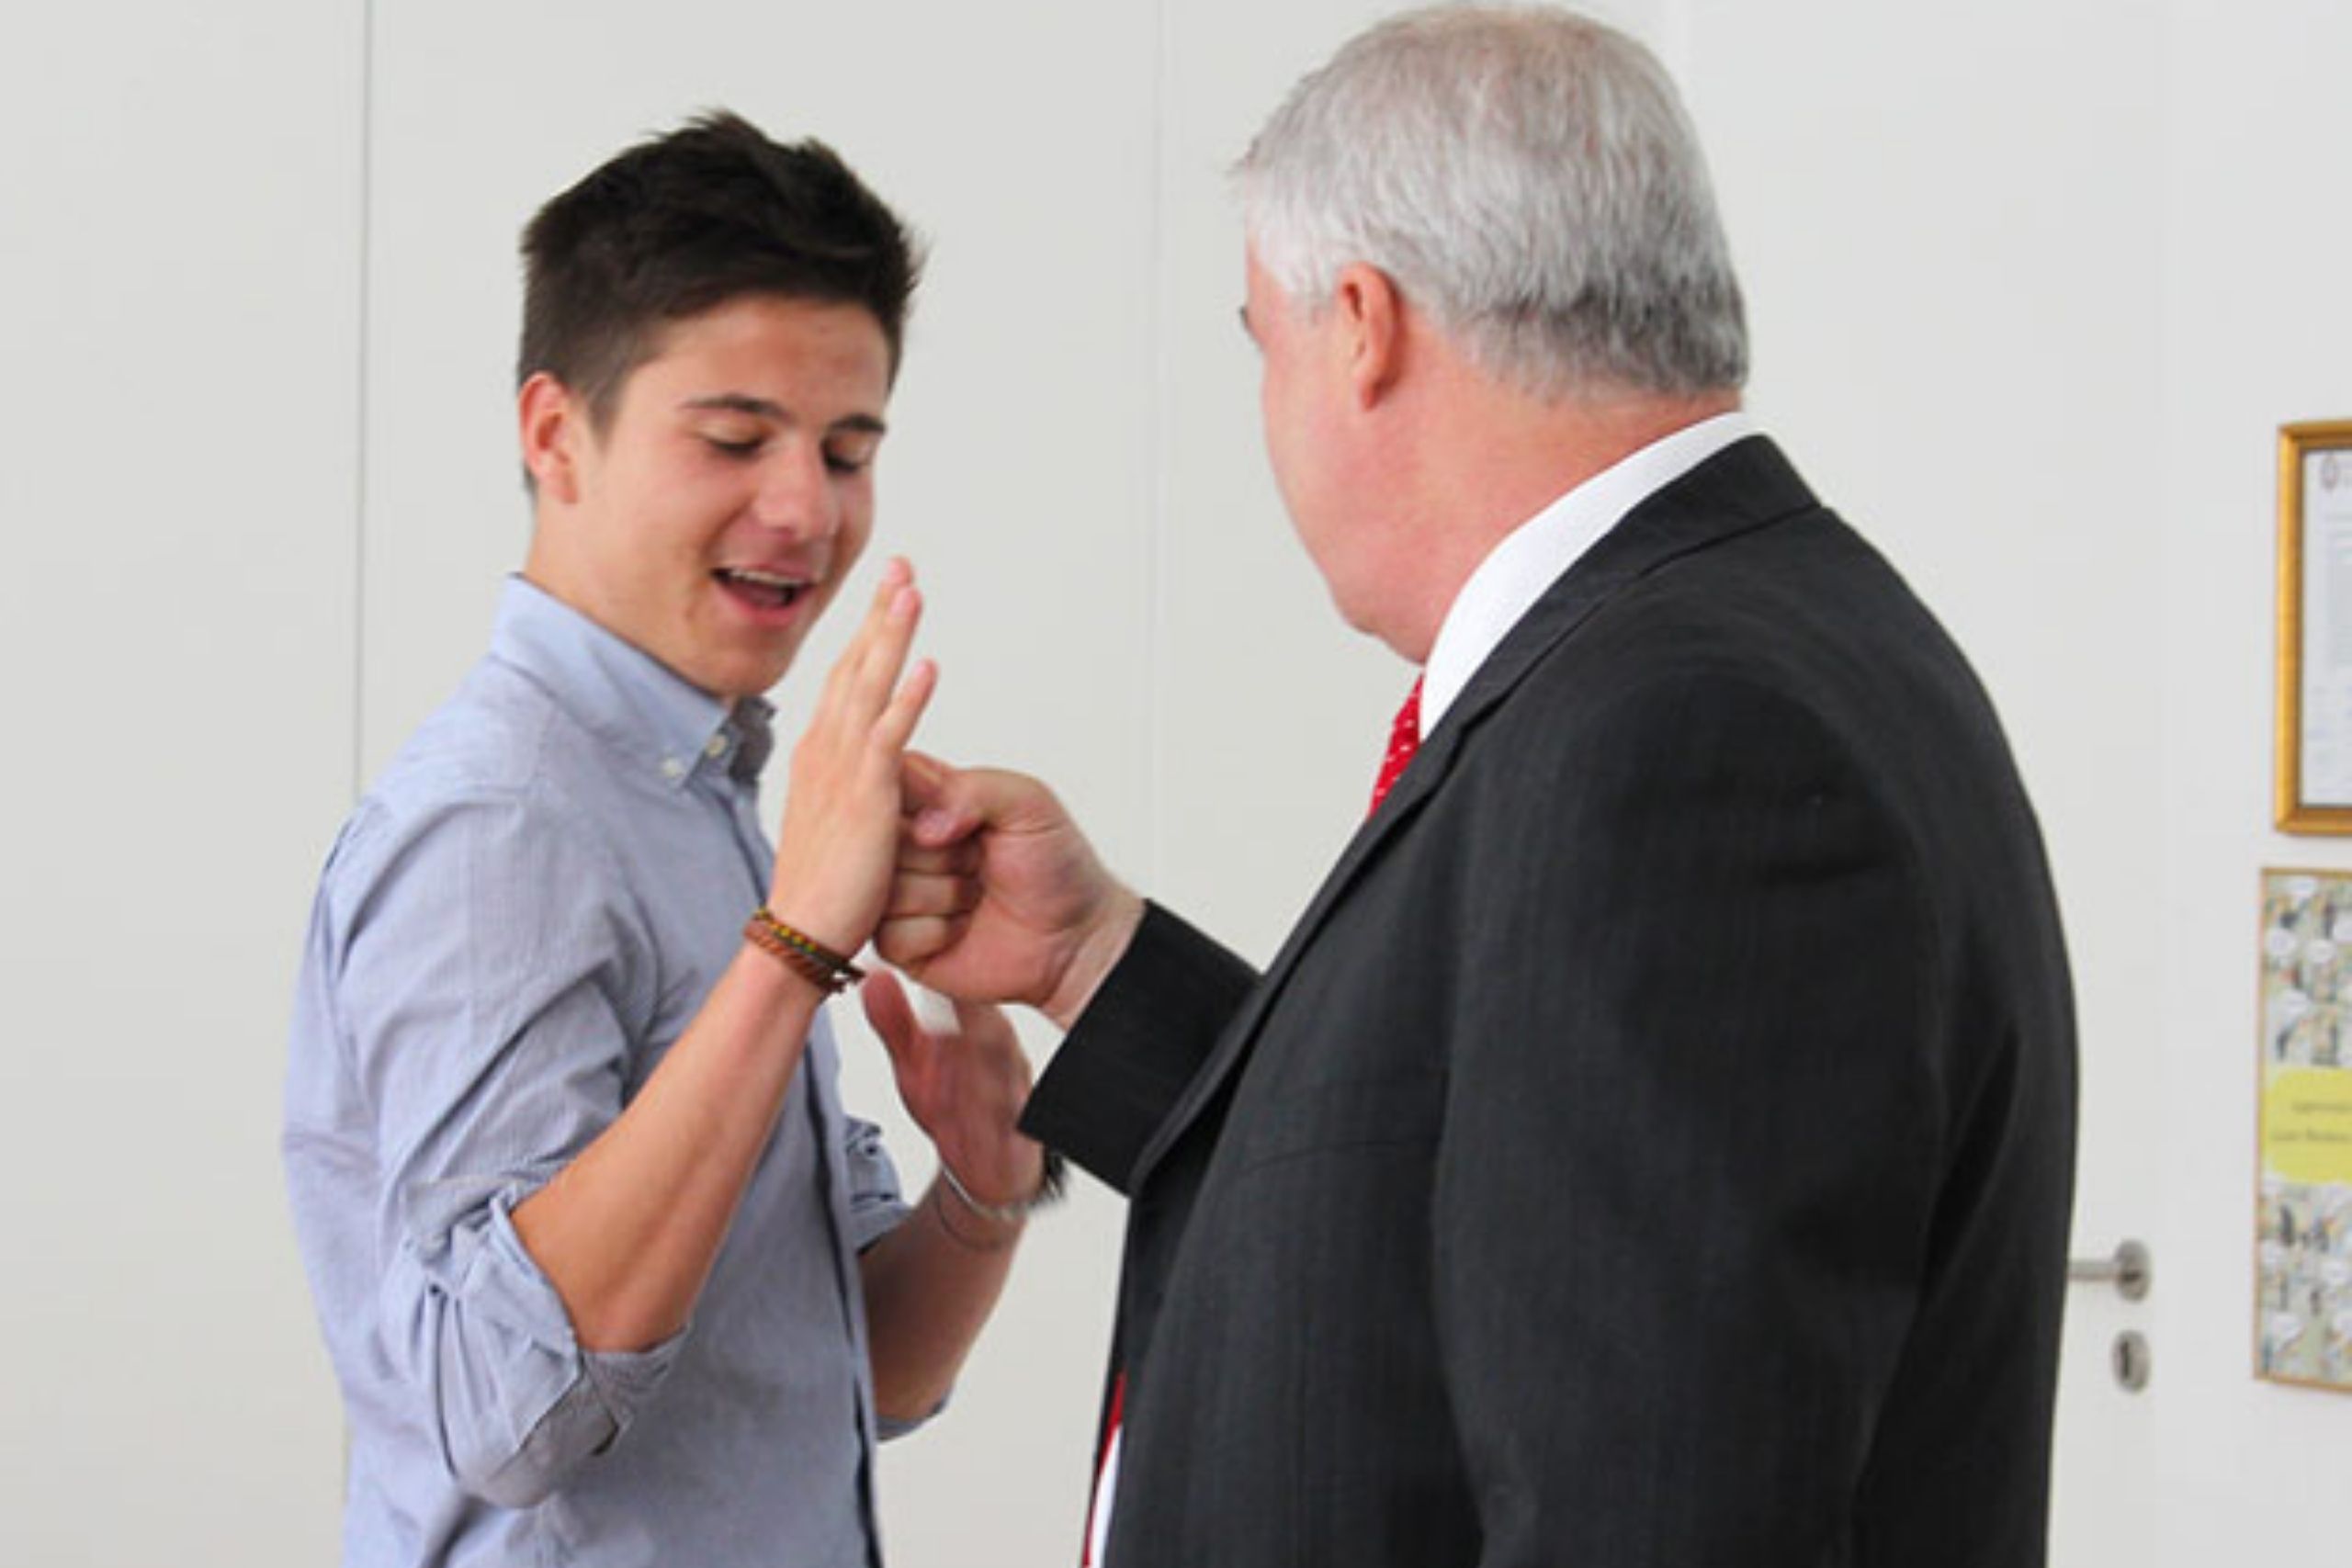 A student taking place in a youth business and entrepreneurship program fist bumps with a mentor.